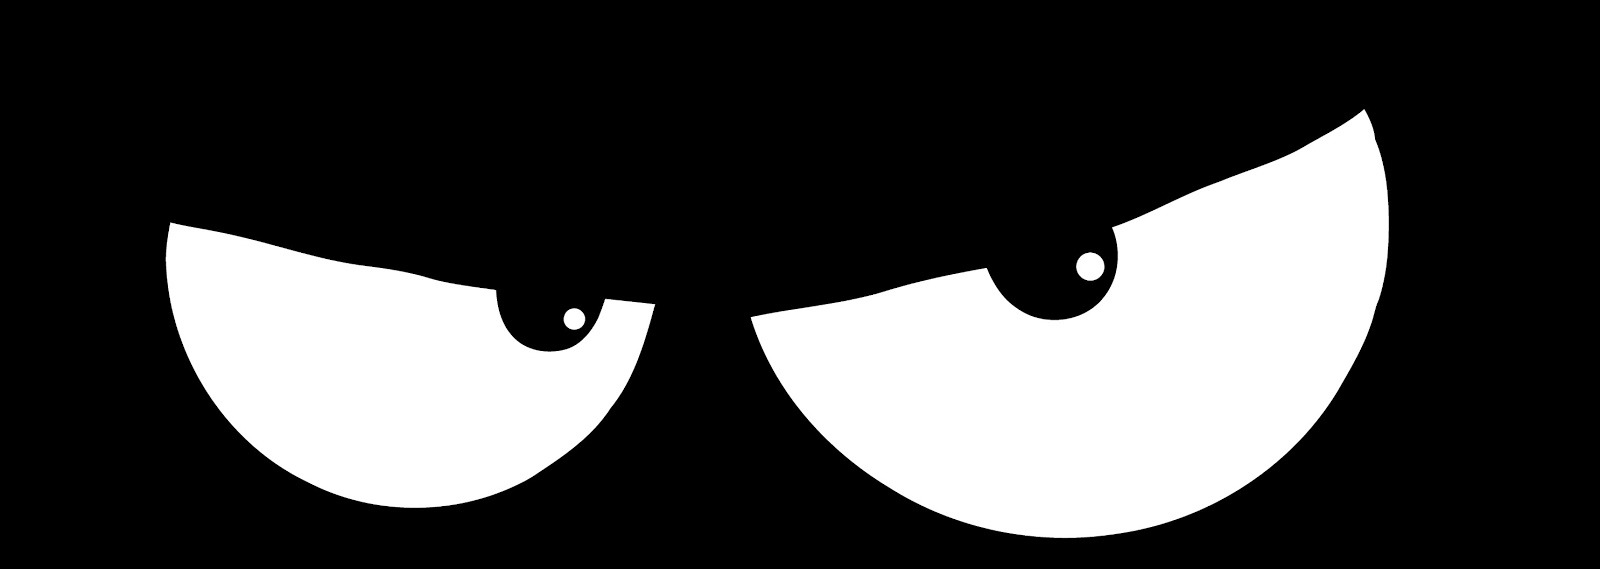 Free Cartoon Angry Eyes, Download Free Cartoon Angry Eyes png images